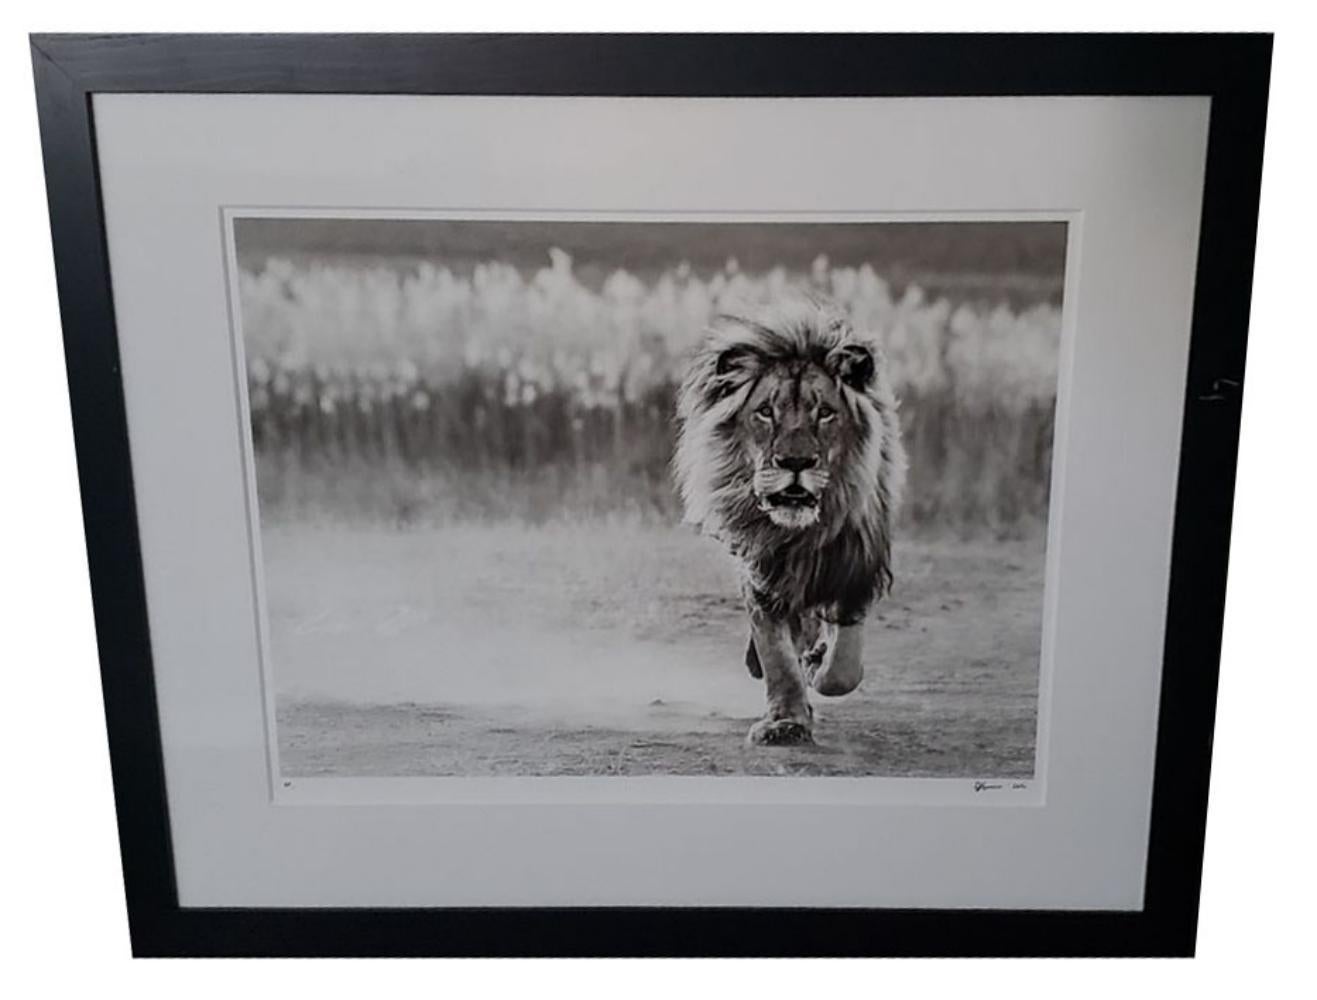 One Foot on the Ground - Photograph by David Yarrow